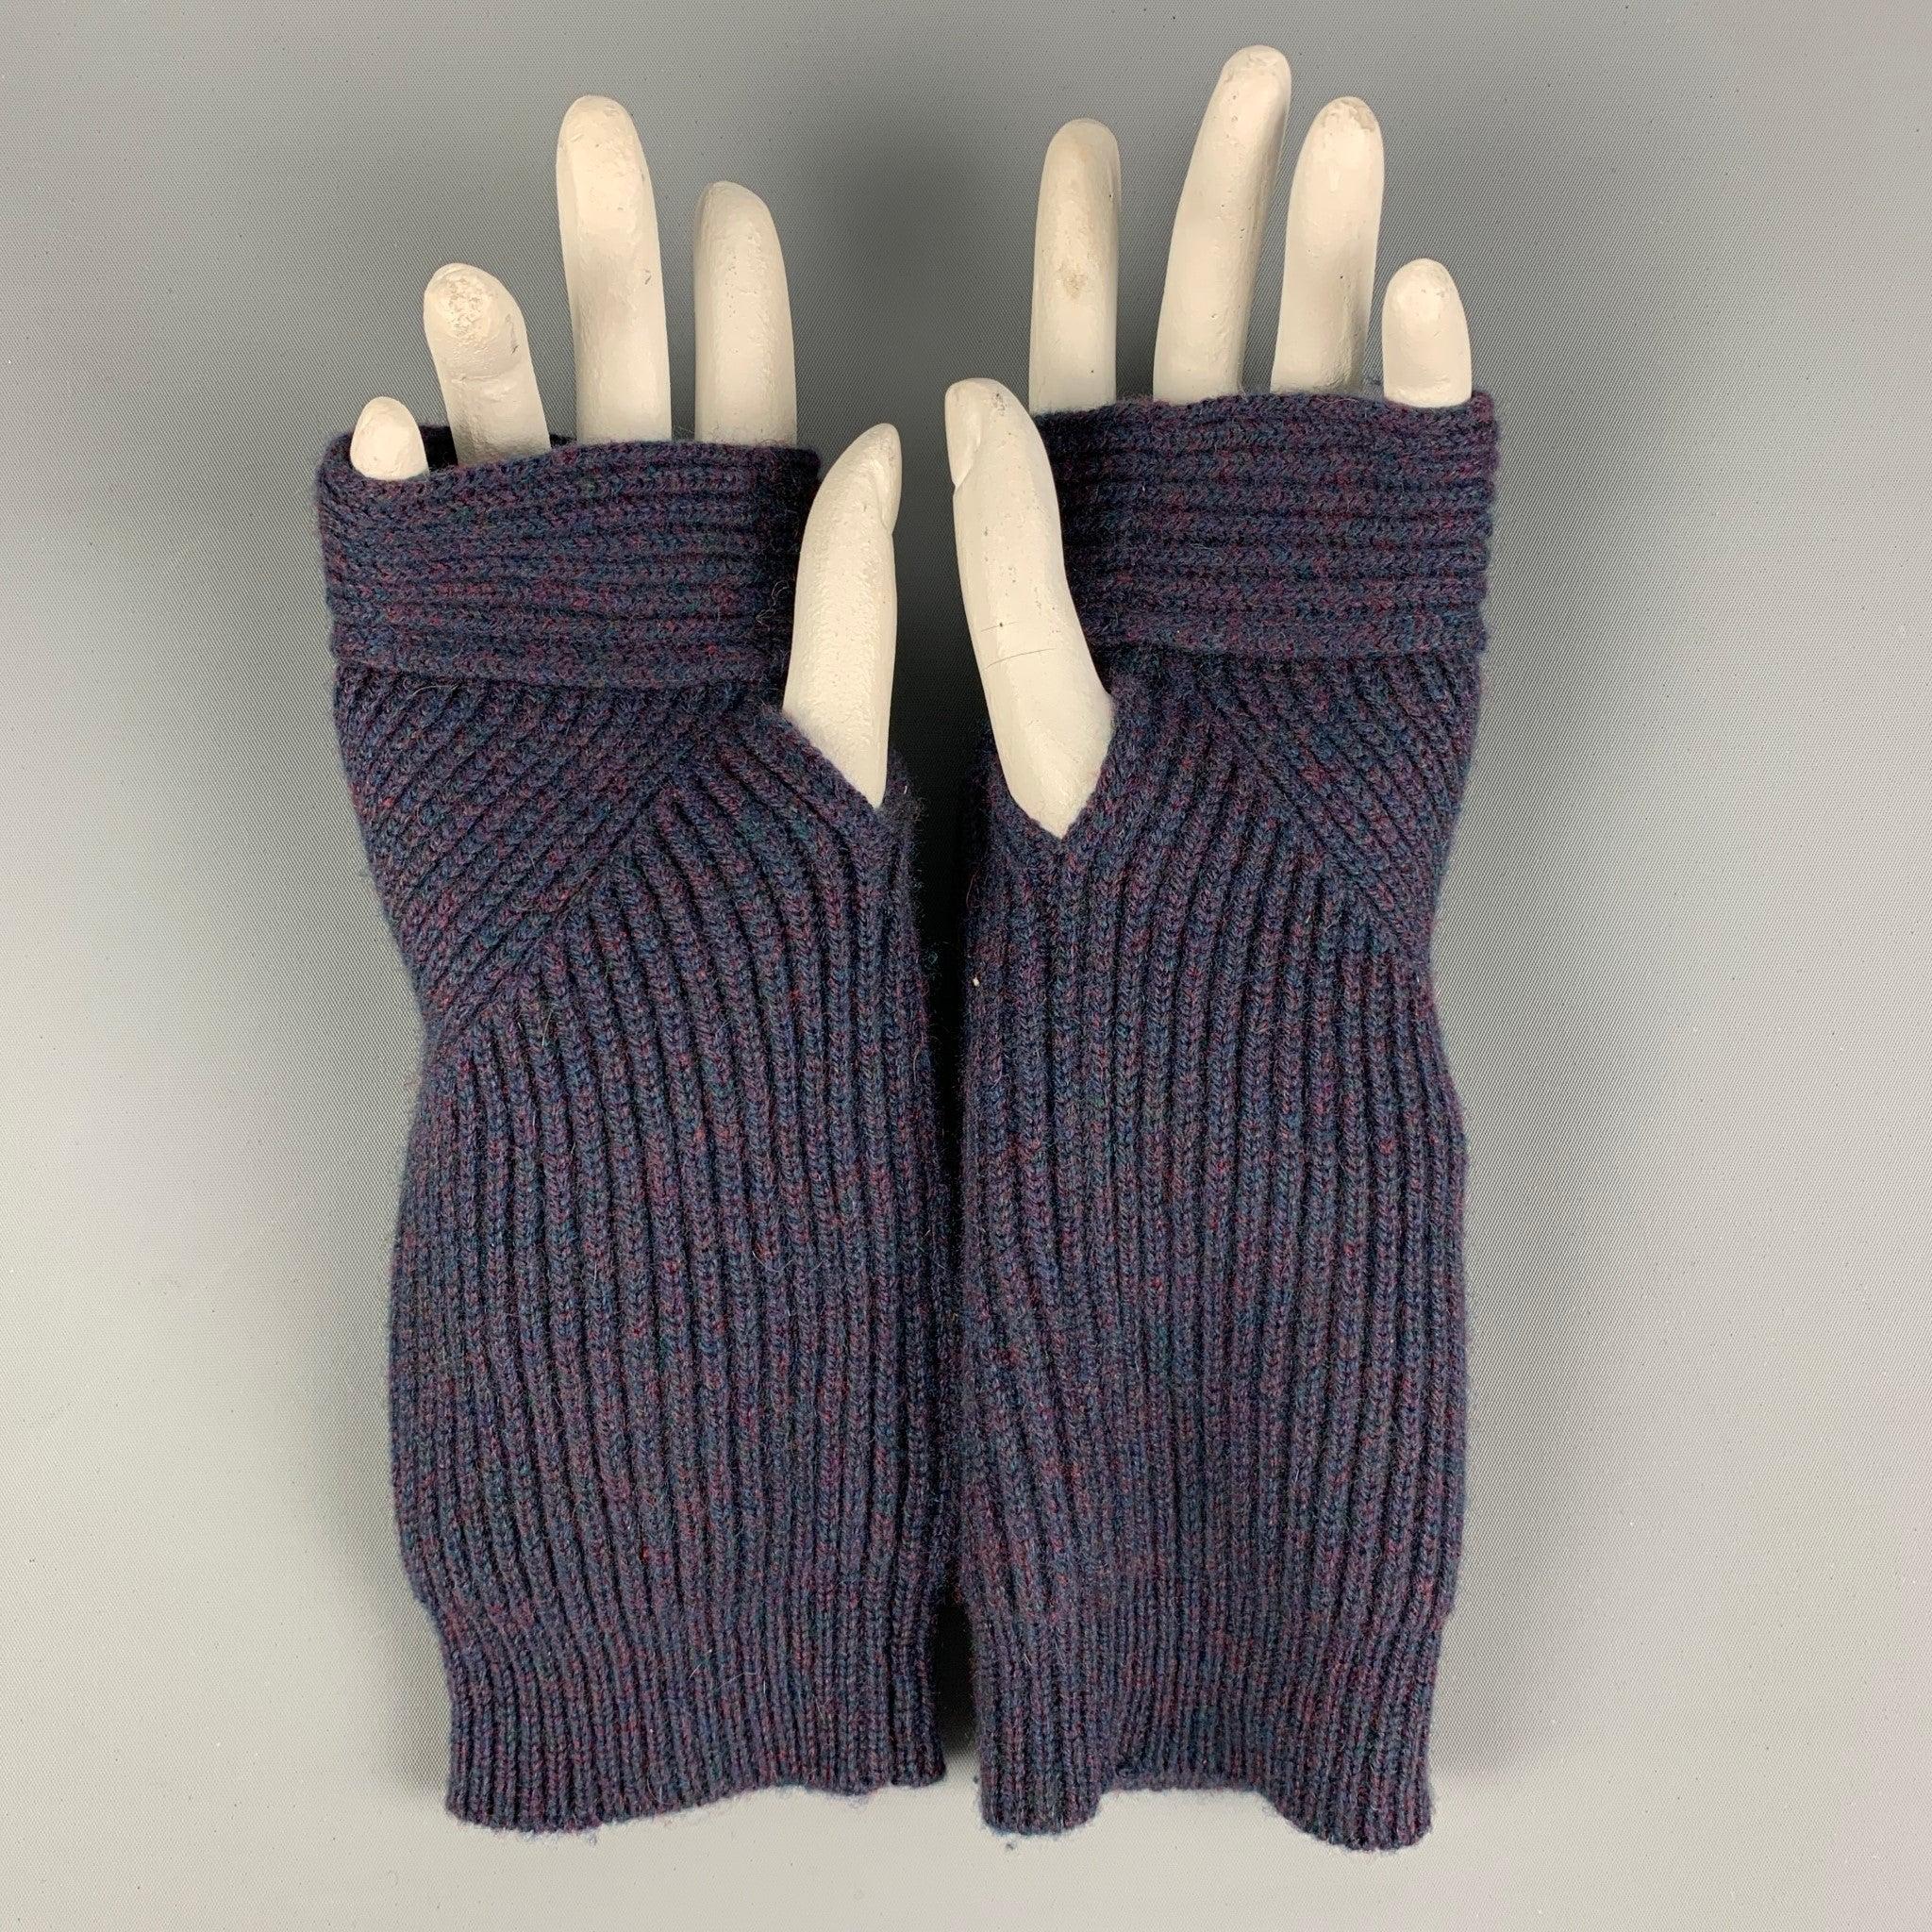 LOUIS VUITTON gloves comes in a navy & burgundy ribbed knit cashmere featuring a fingerless style. Made in Italy.
 Very Good
 Pre-Owned Condition. 
 

 Marked:  Size tag removed.  
 

 Measurements: 
  Width: 3.25 inches Length: 9.5 inches 
  
  
 